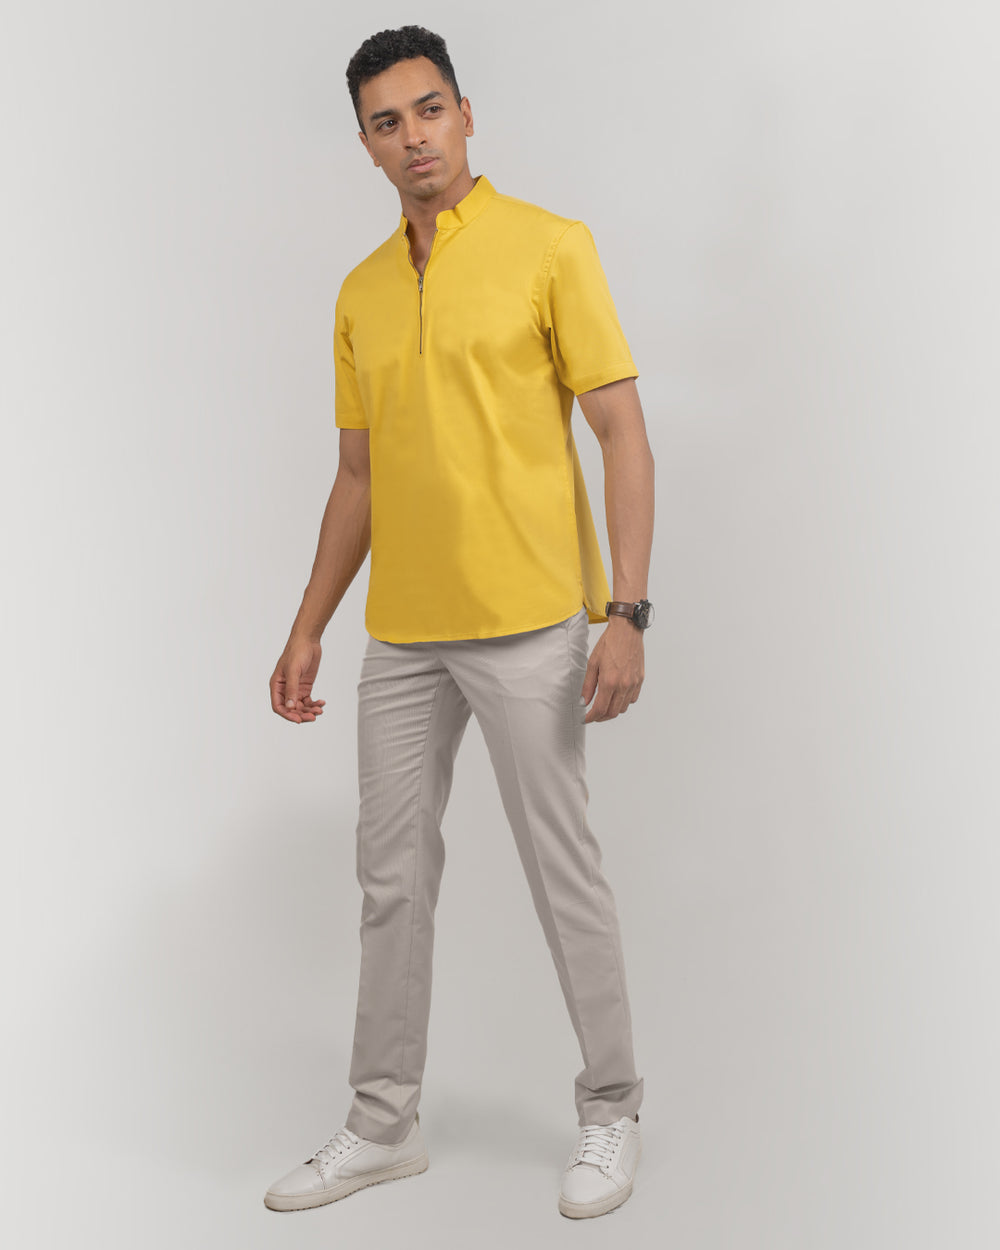 Modern stylish yellow zipper front shirt for men, Stylish and functional zipper front shirt for men, combining modern design with comfort